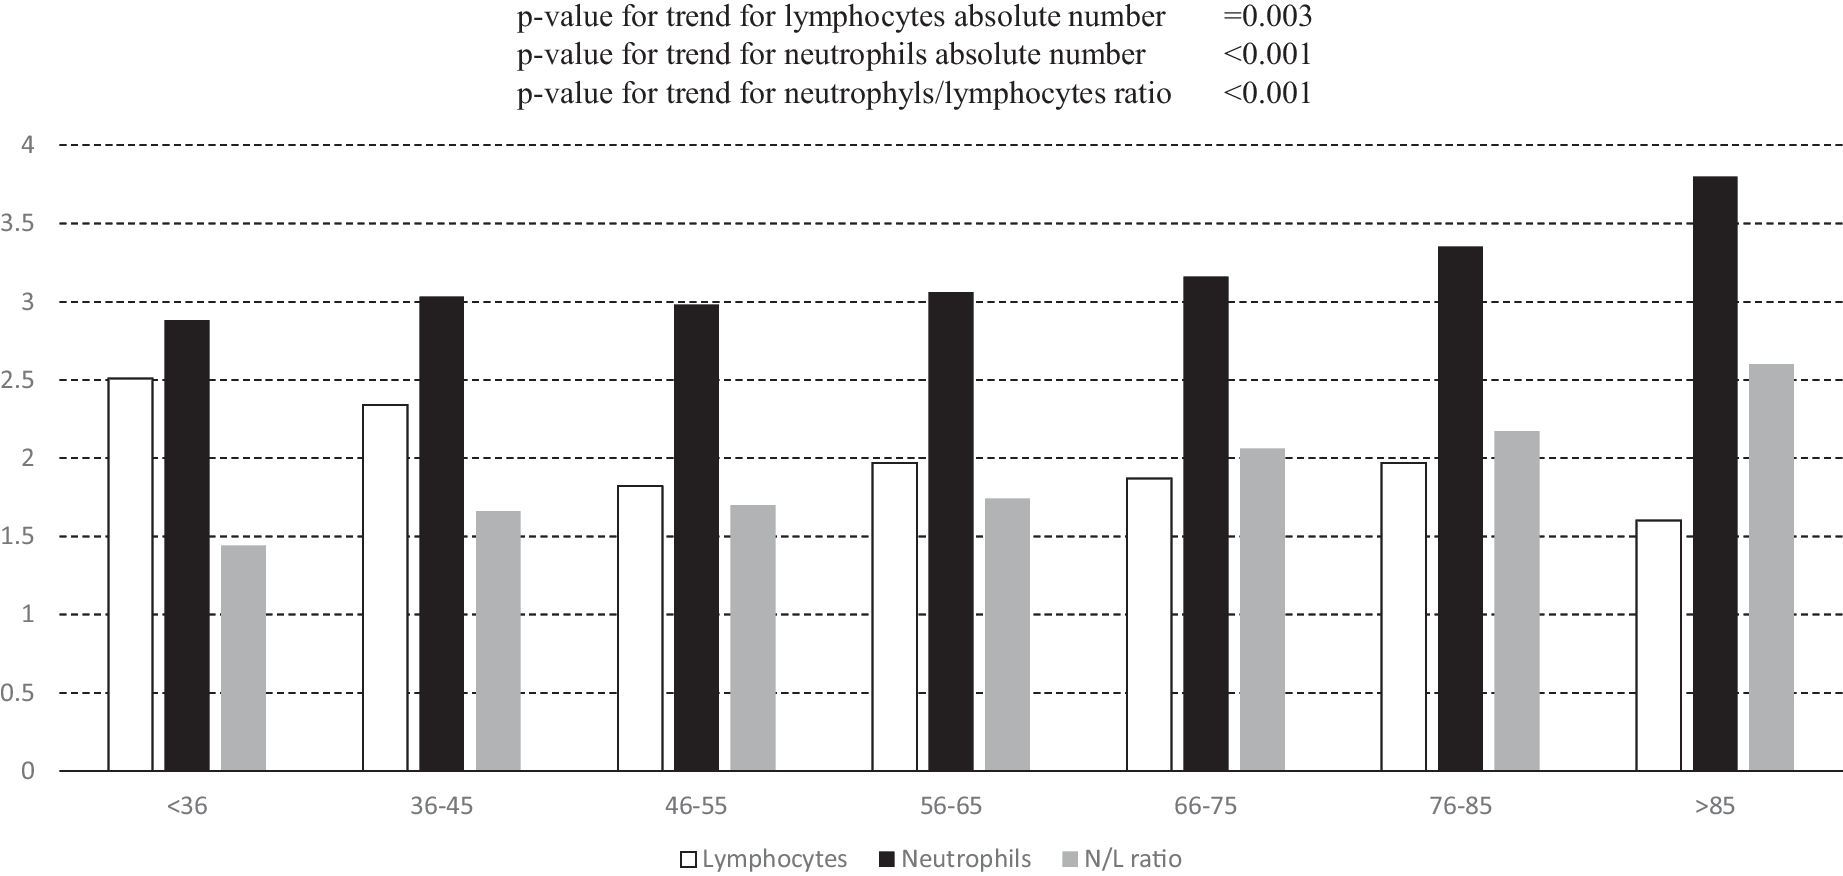 Neutrophil, lymphocyte count, and neutrophil to lymphocyte ratio predict multimorbidity and mortality—results from the Baltimore Longitudinal Study on Aging follow-up study